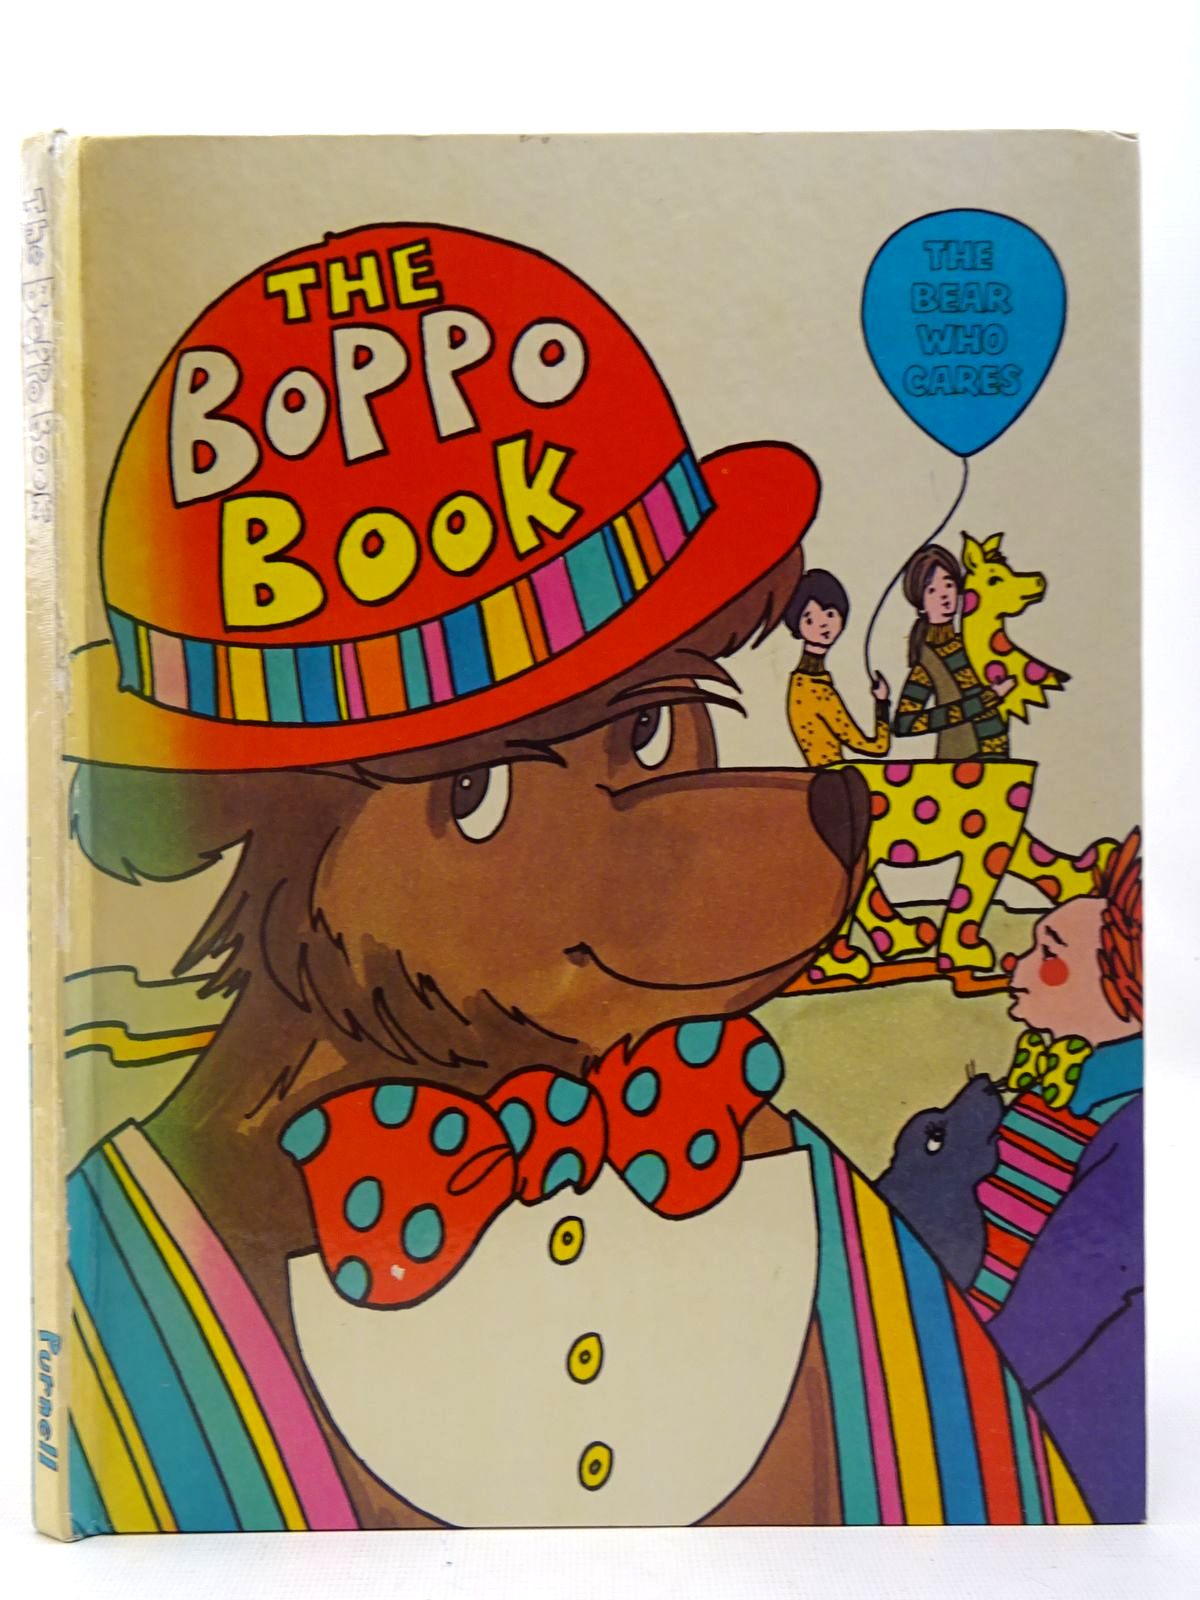 Photo of THE BOPPO BOOK written by Cotton, Robert illustrated by Cameron, published by Purnell (STOCK CODE: 2127213)  for sale by Stella & Rose's Books